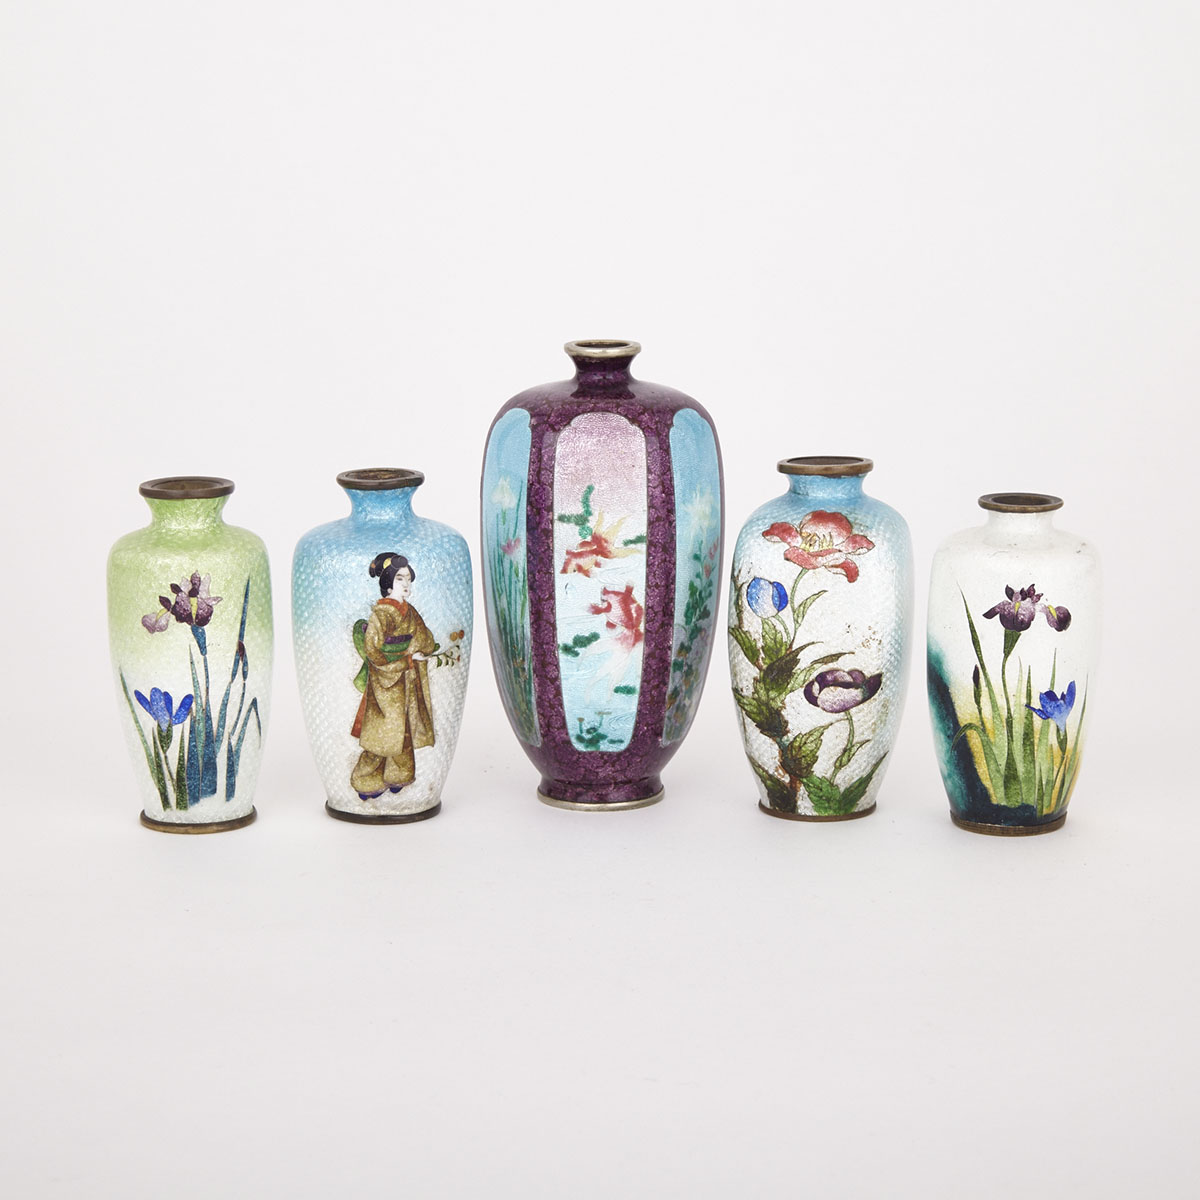 Group of Five Japanese Miniature Cloisonne Vases, 19th/20th Century